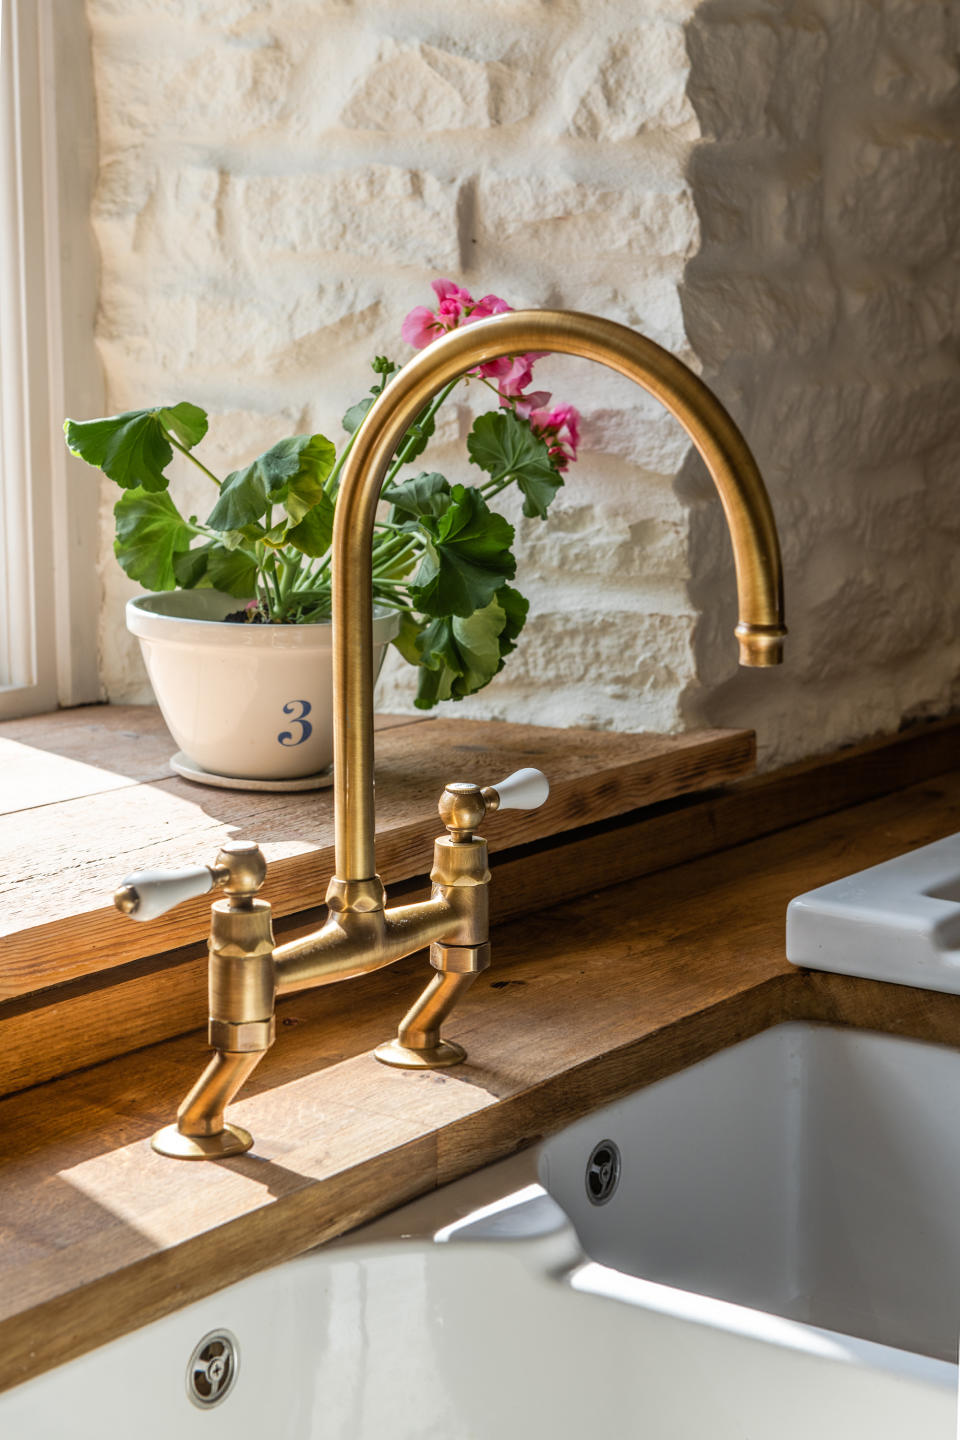 Integrated antique-style brassware for added warmth